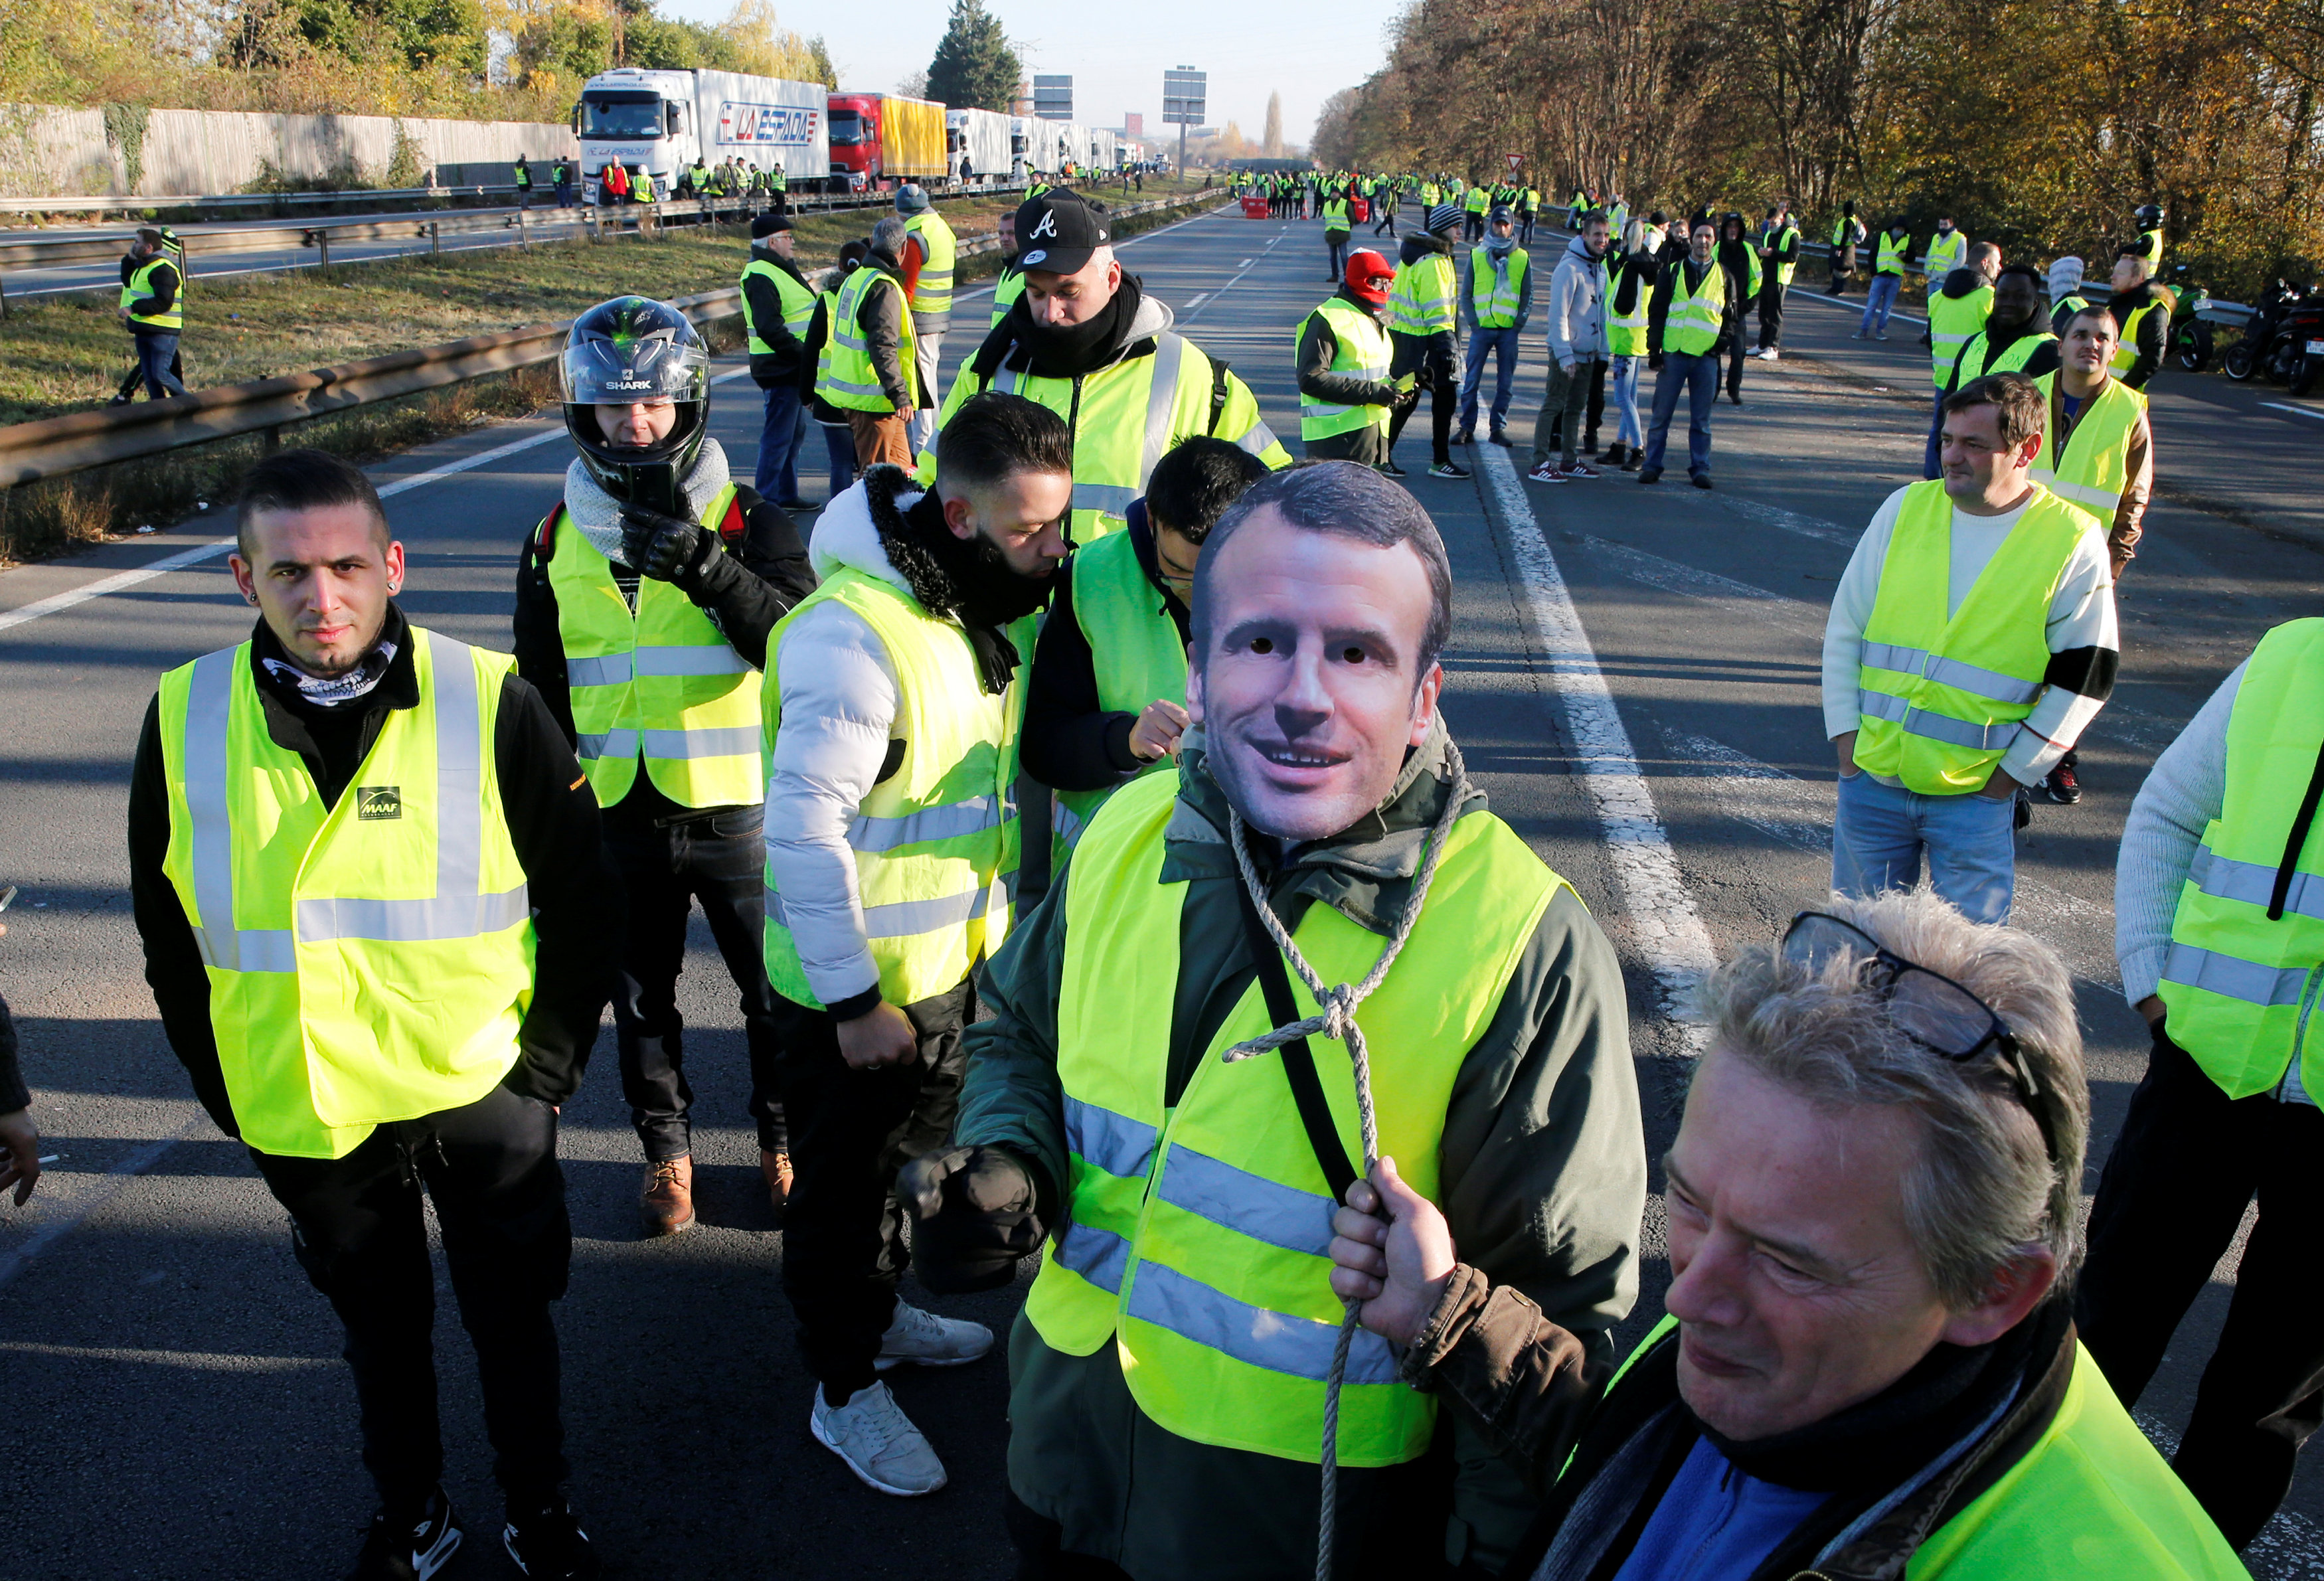 French drivers revolt against high fuel prices